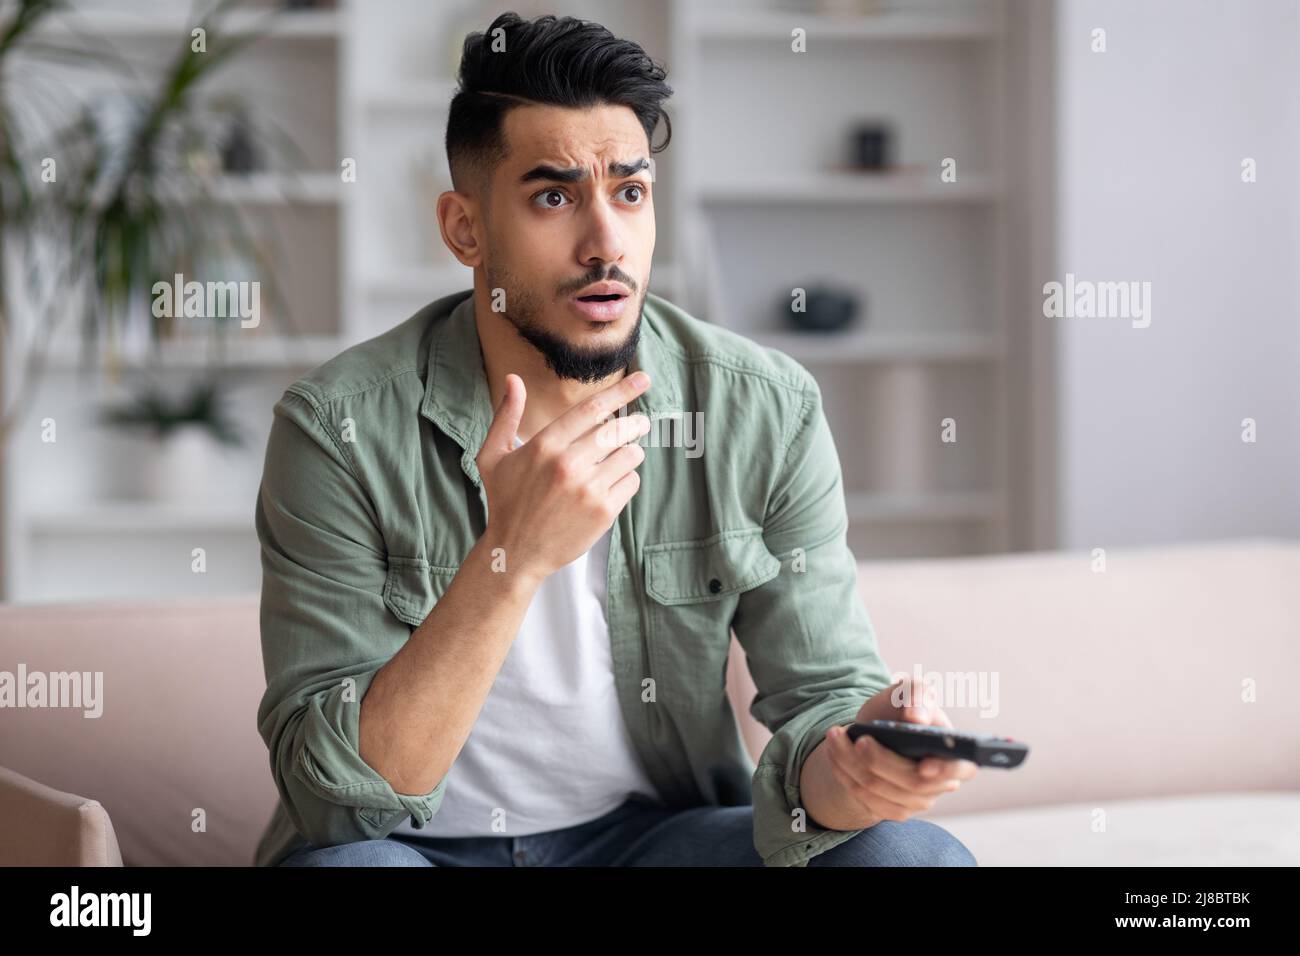 Shocked frightened young arab man with beard with remote control watches news on TV sits on sofa Stock Photo